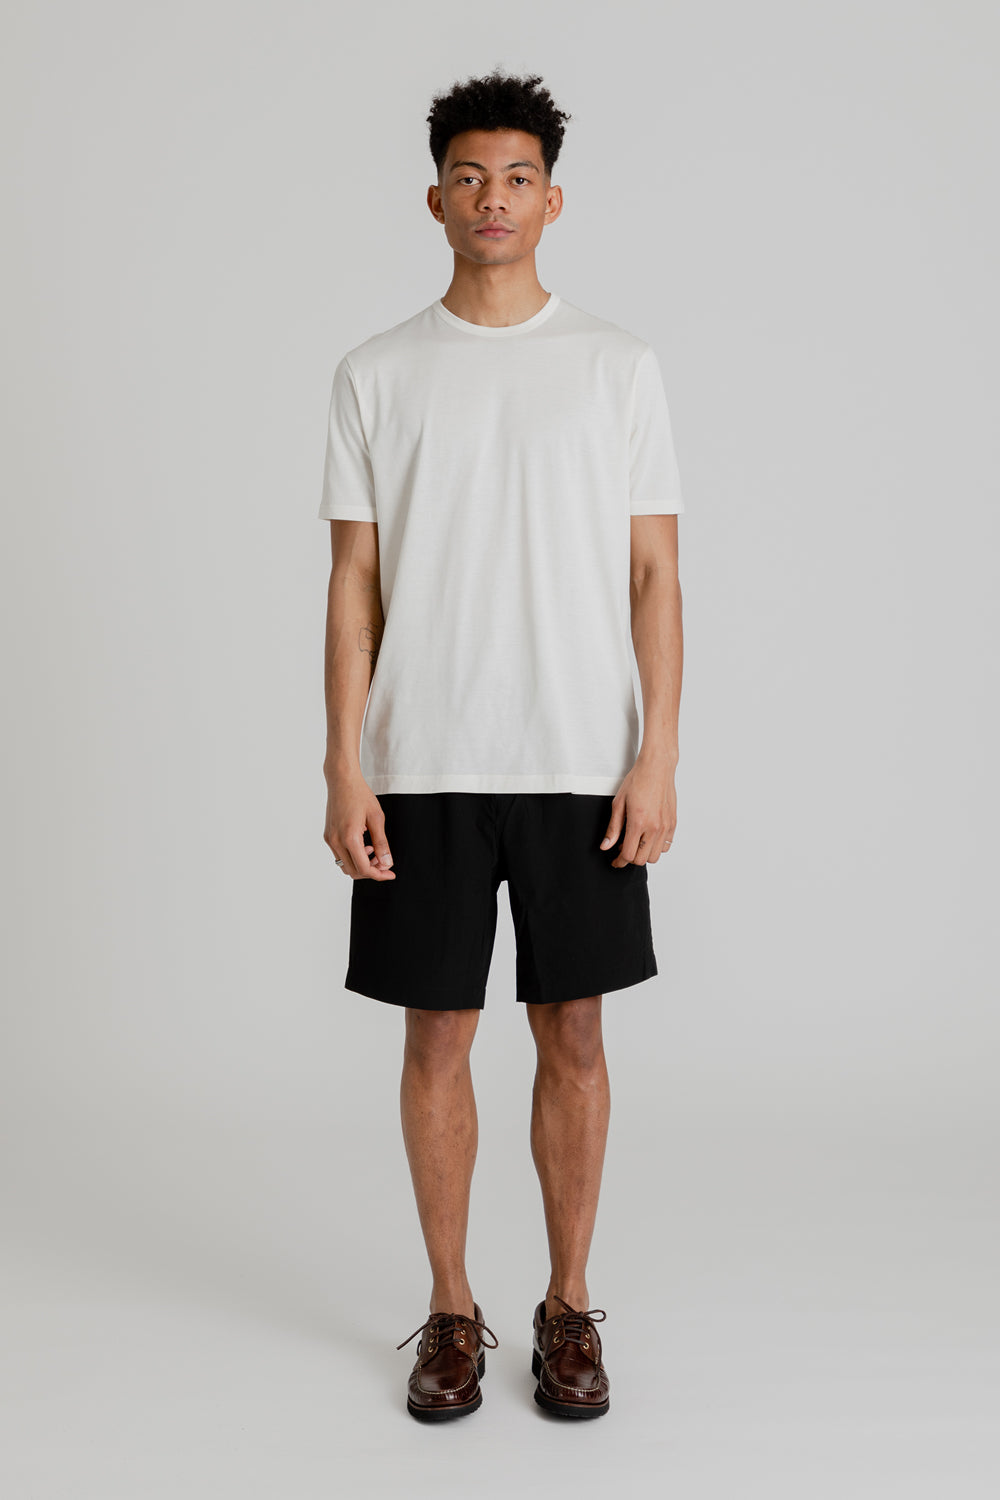 Sunspel Classic T-Shirt in Archive White